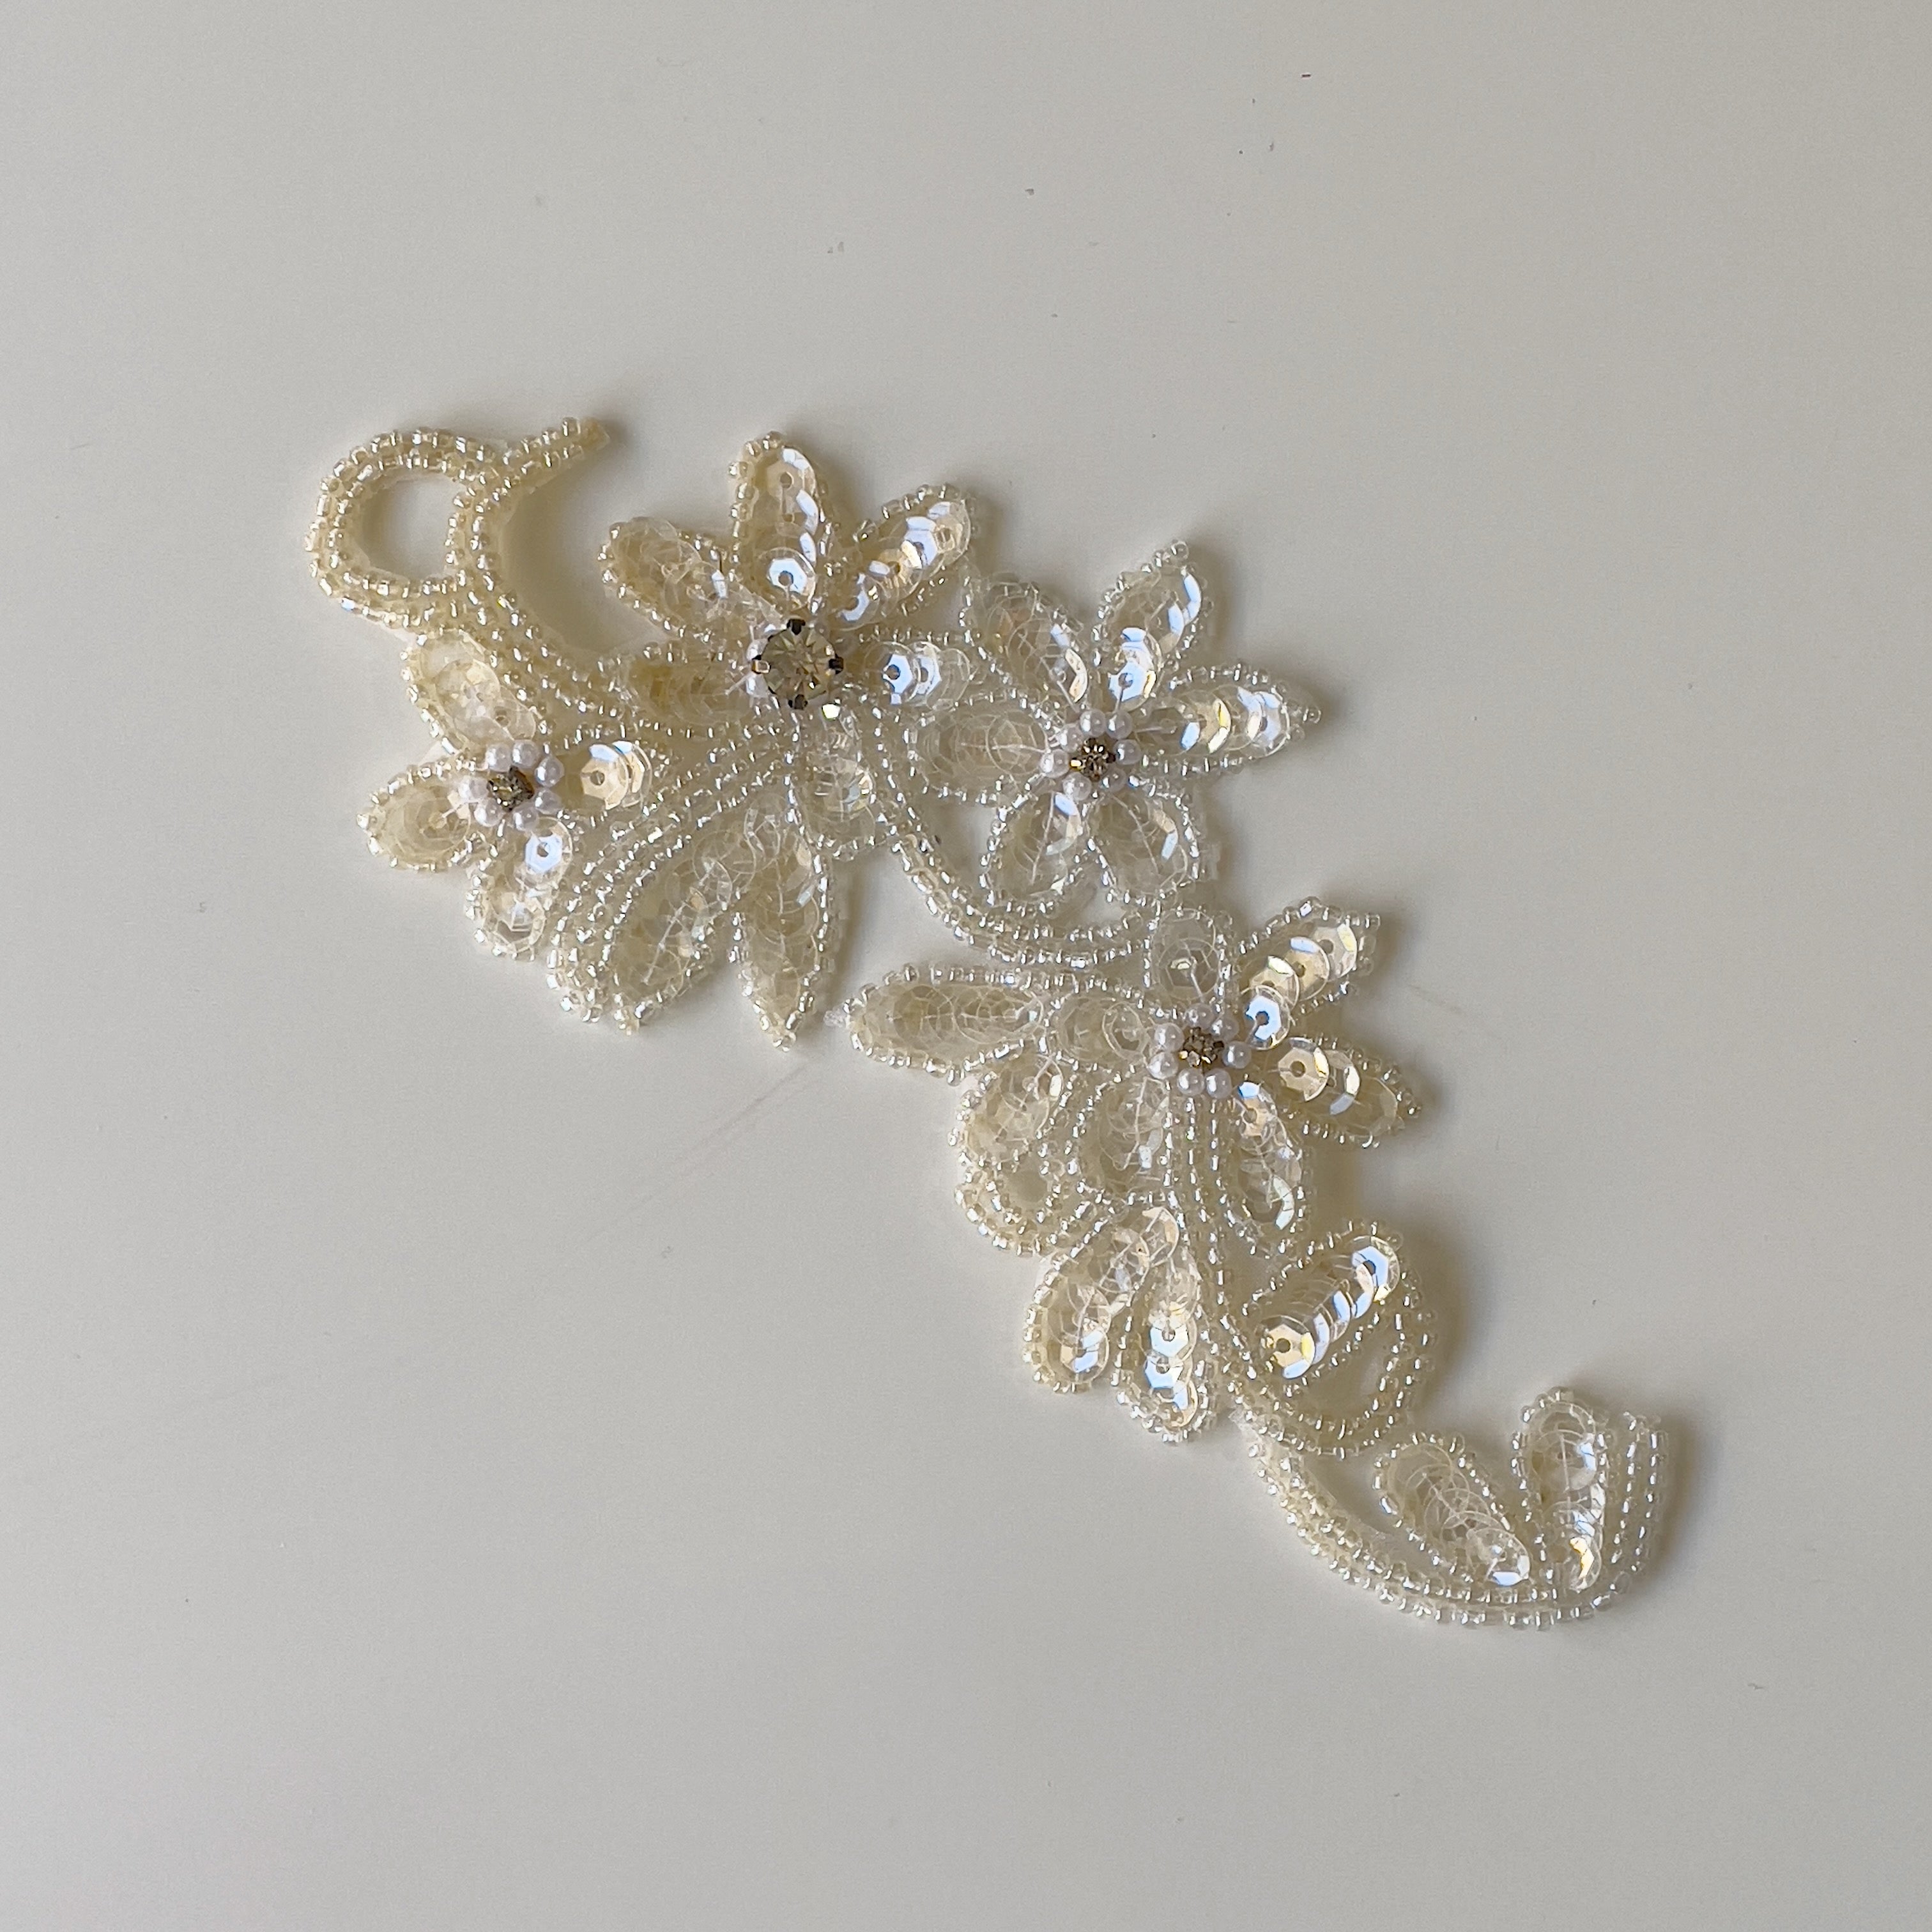 A sparkly single cream floral applique embellished with sequins and beads.  The flowers centres have a rhinestone decoration circled with tiny pearls.  The applique is laying flat on a white background.